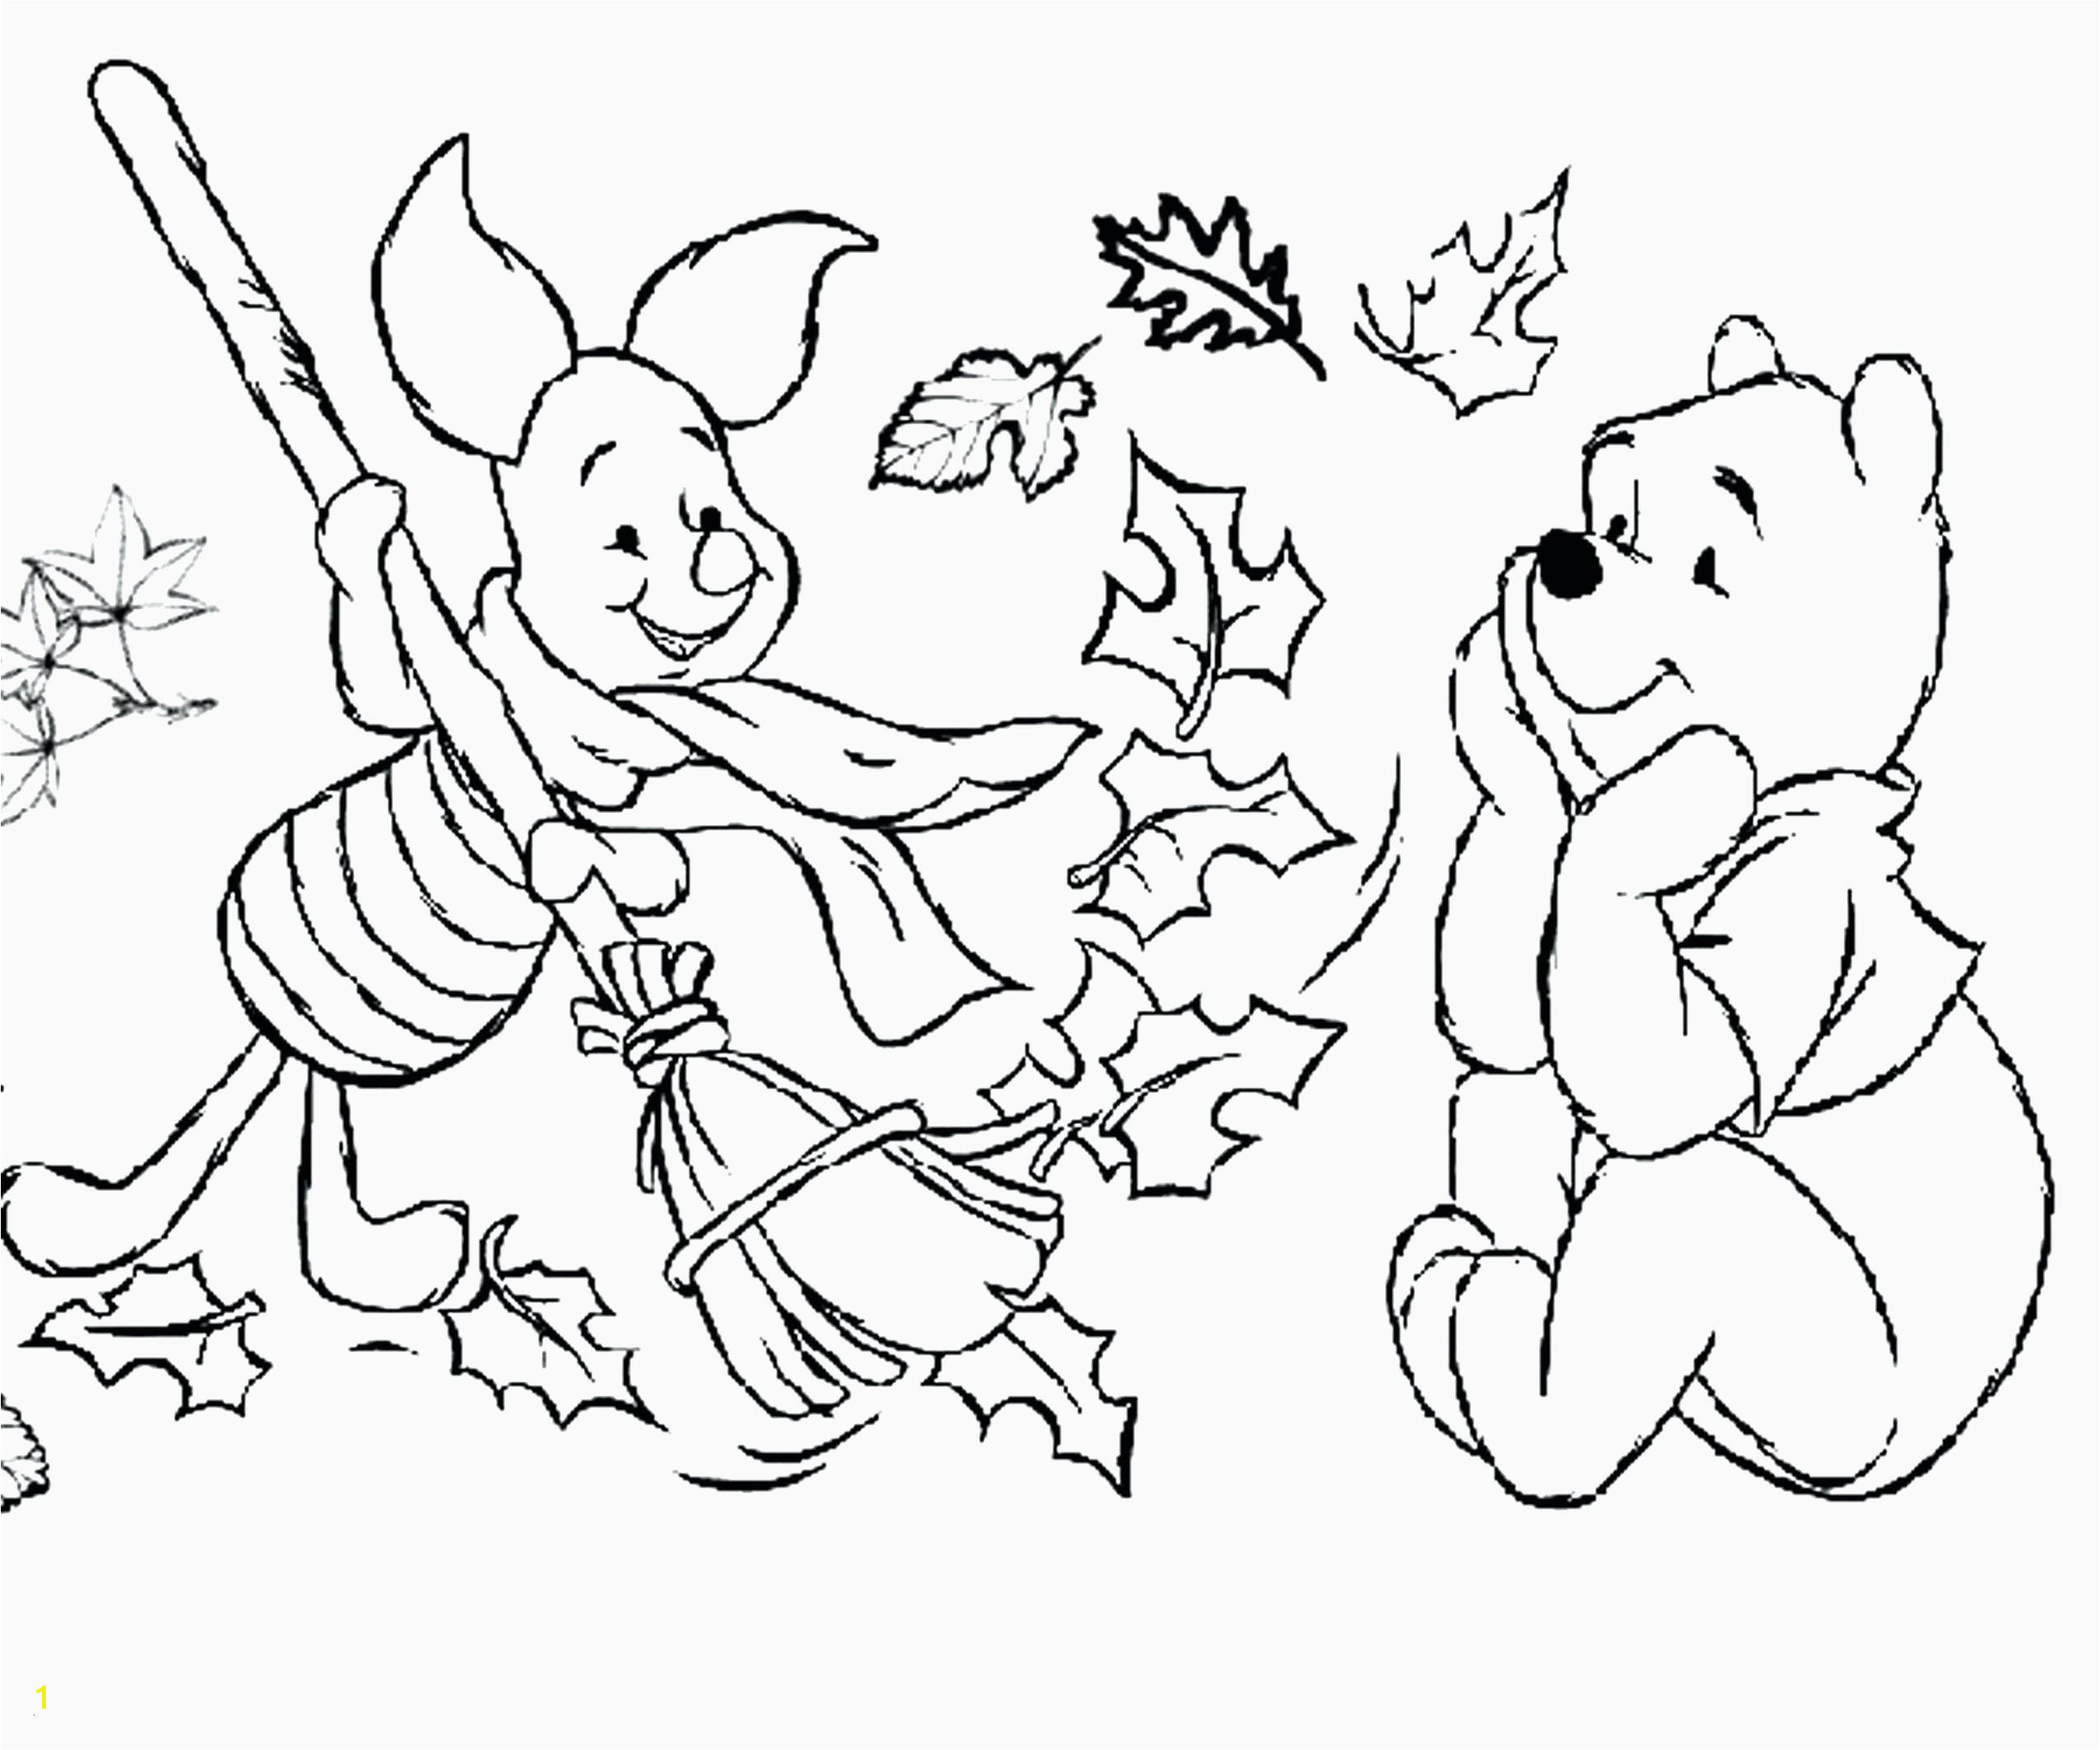 Coloring Pages Teddy Bear Printable Free Coloring Pages for Preschool Di 2020